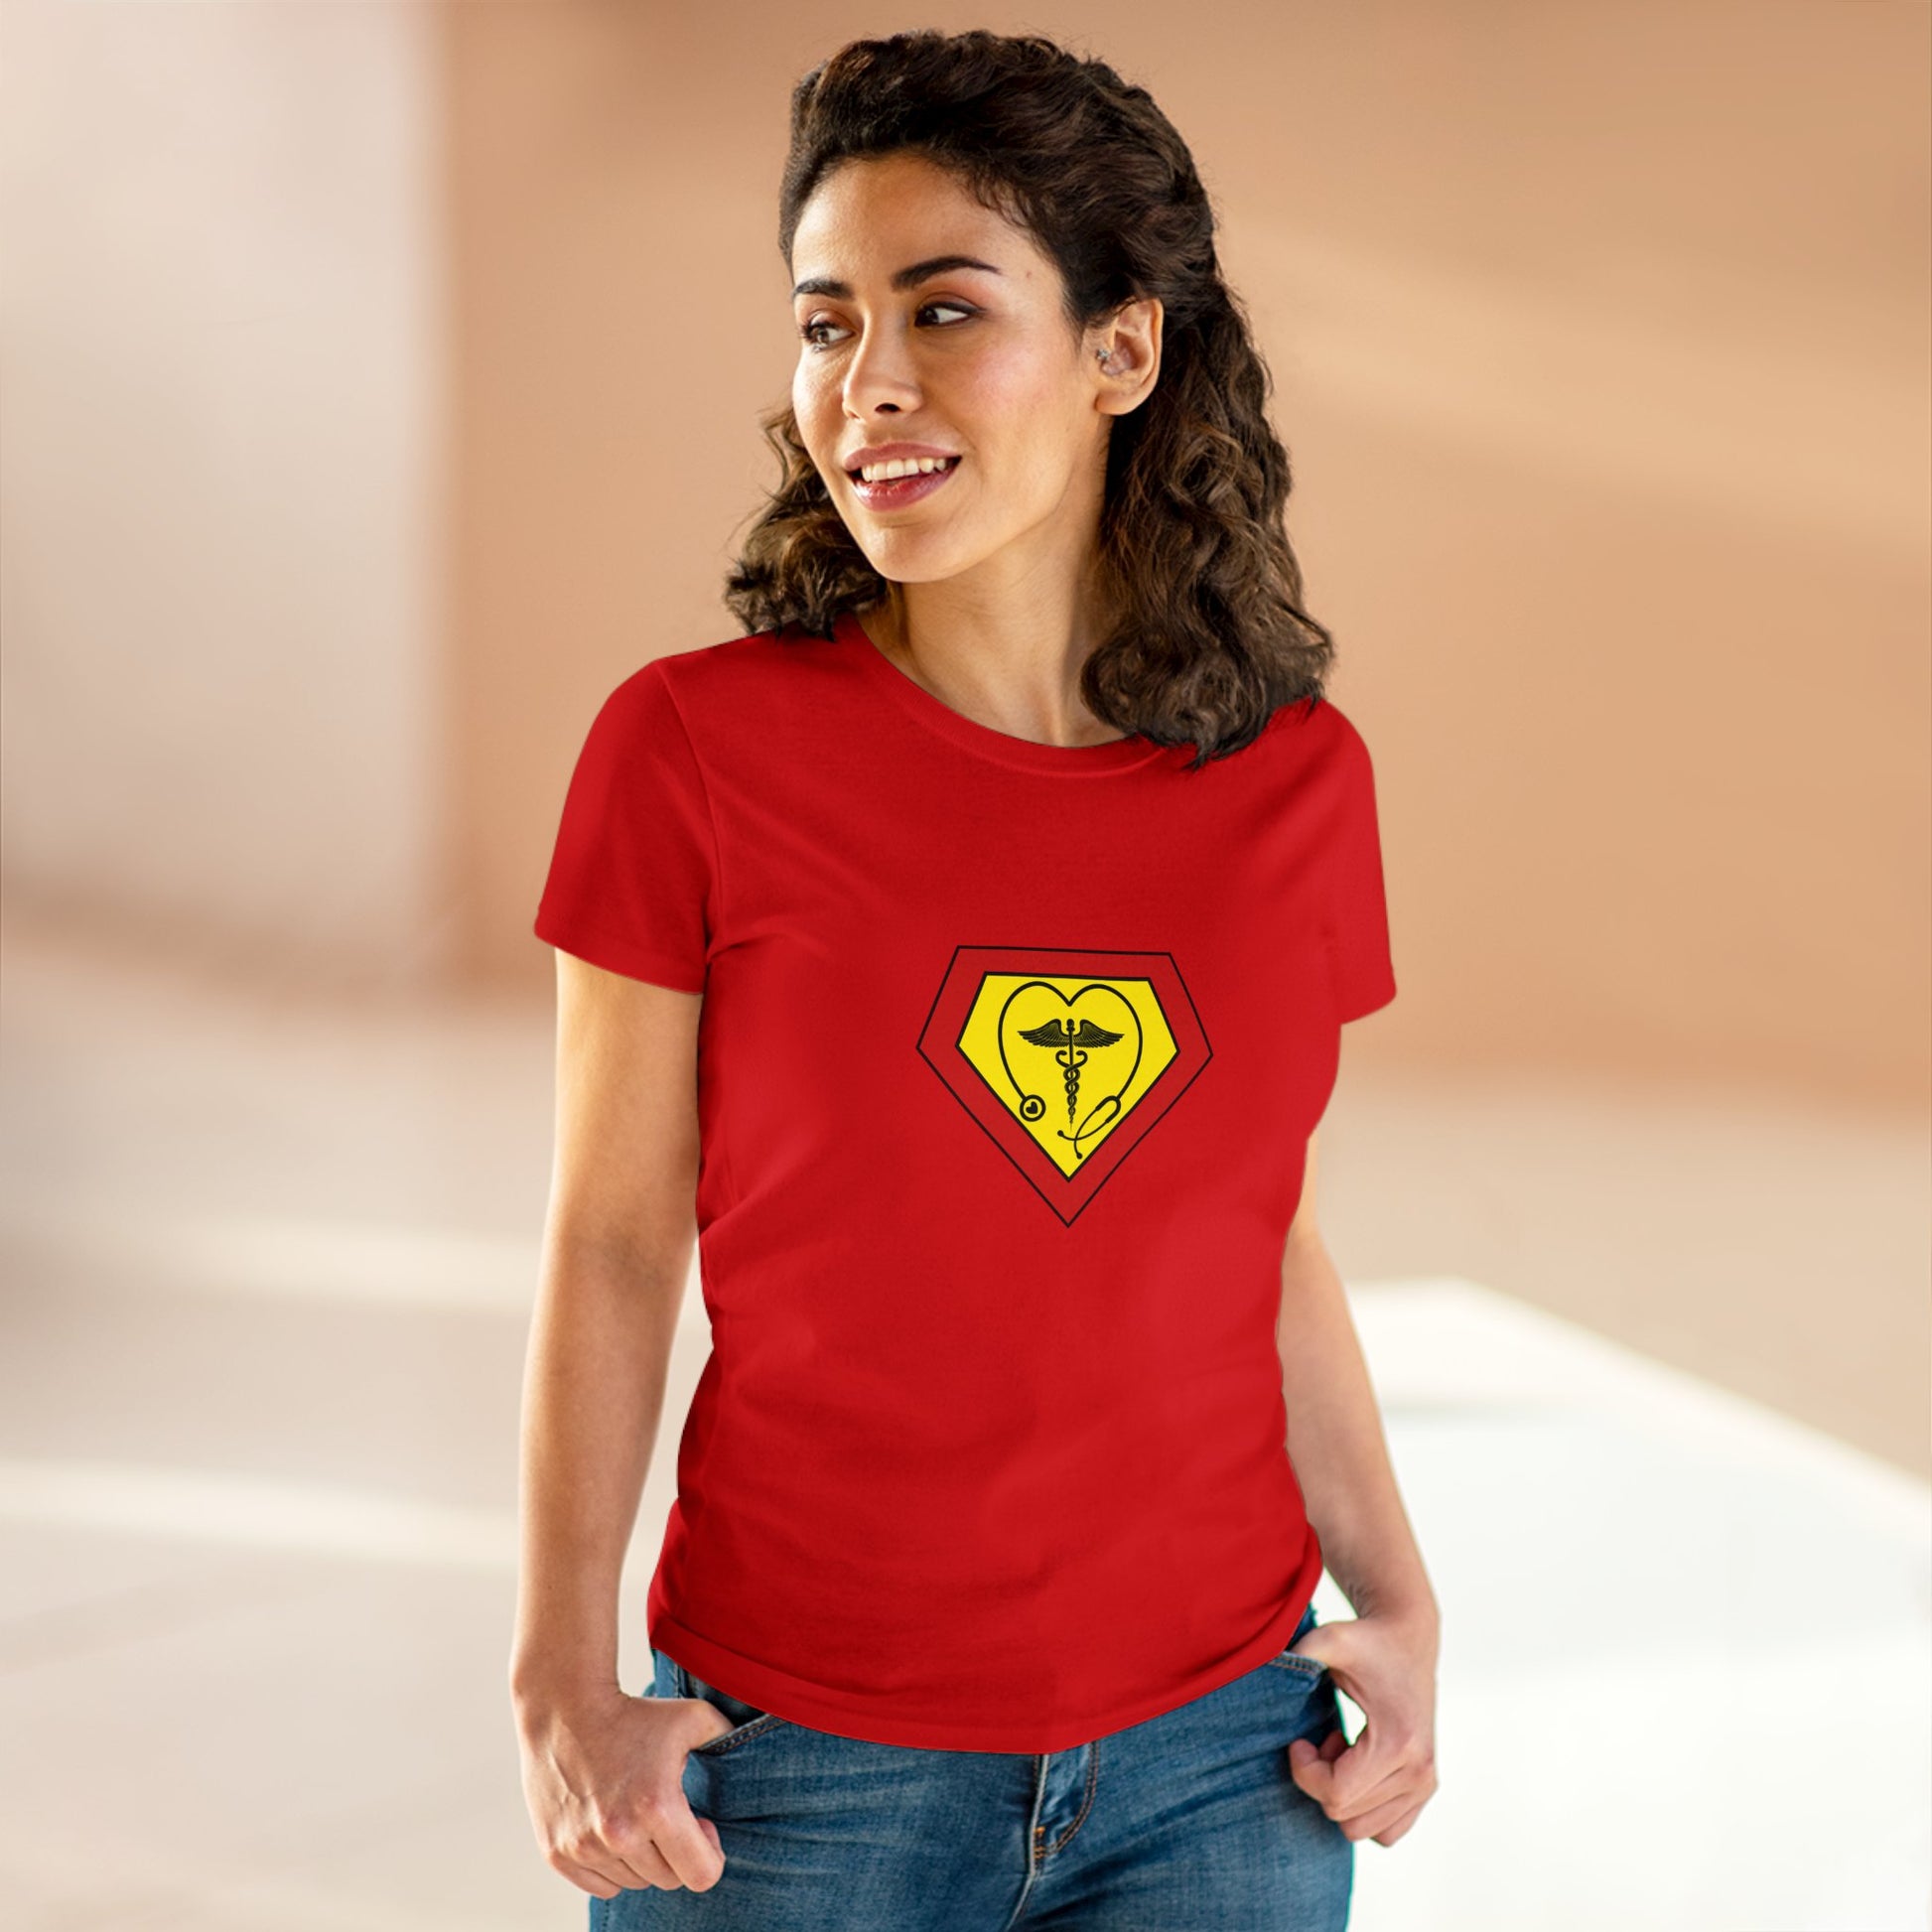 Occupation, Medical Worker. Woman wearing a superhero style medical symbol on a t-shirt.